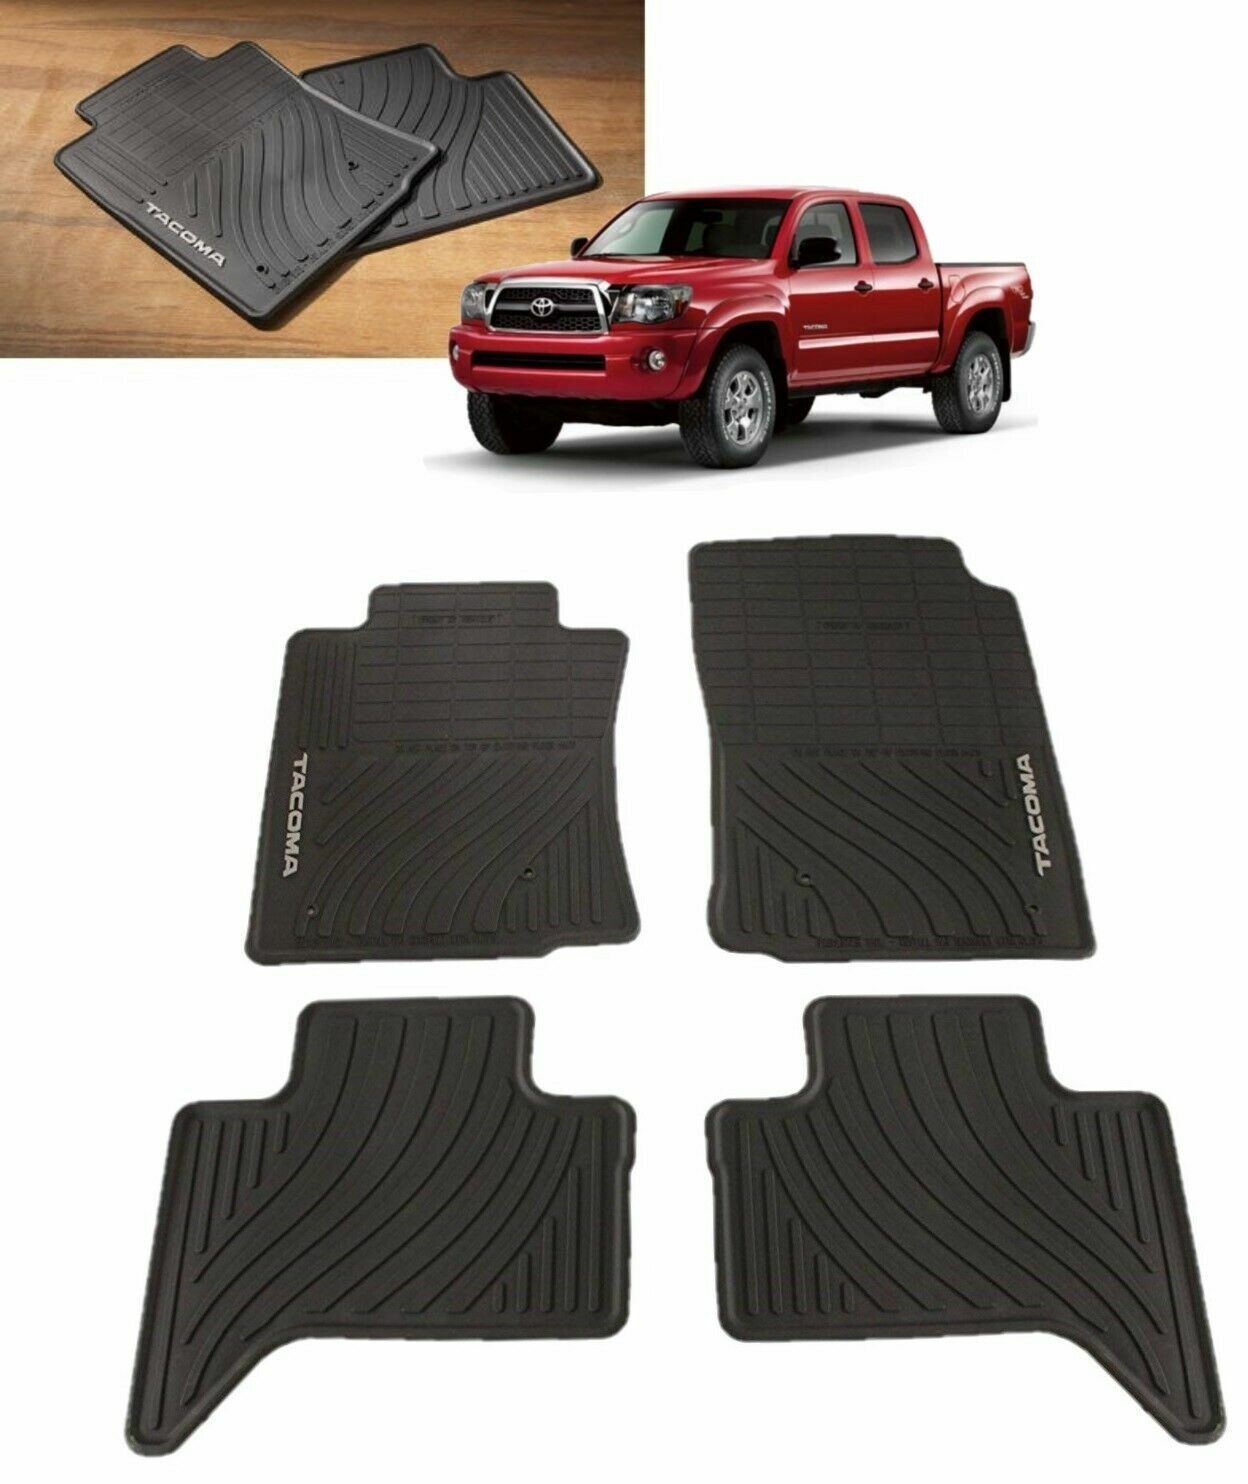 2005-2011 Tacoma Floor Mats All Weather Mats (DOUBLE CAB) Toyota PT908-35002-02